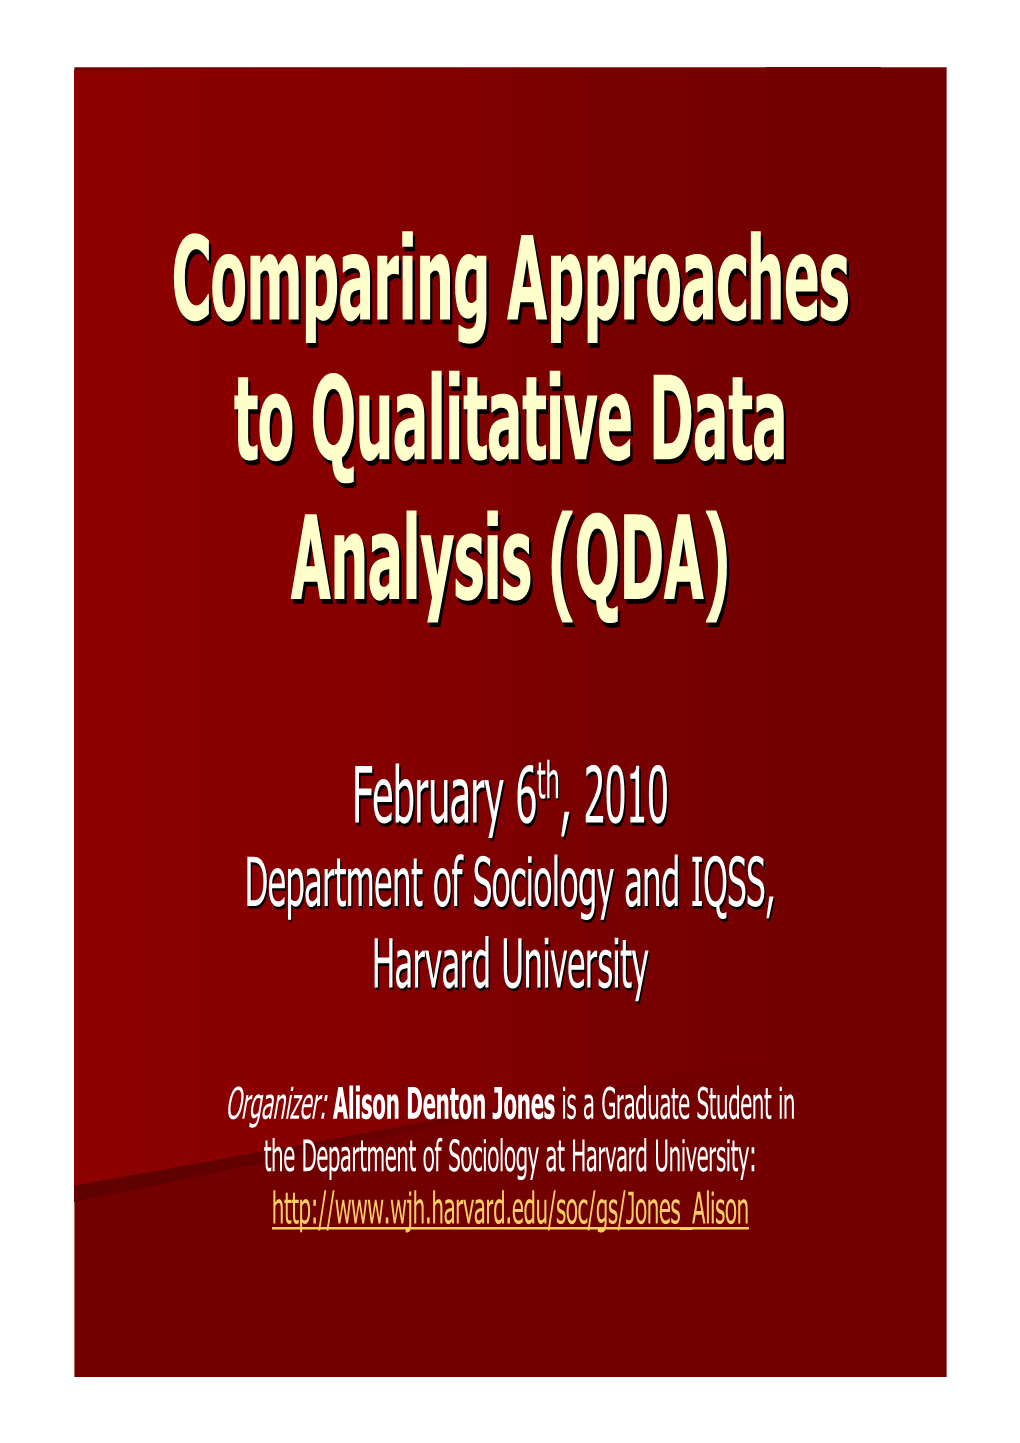 Comparing Approaches to Qualitative Data Analysis (QDA)